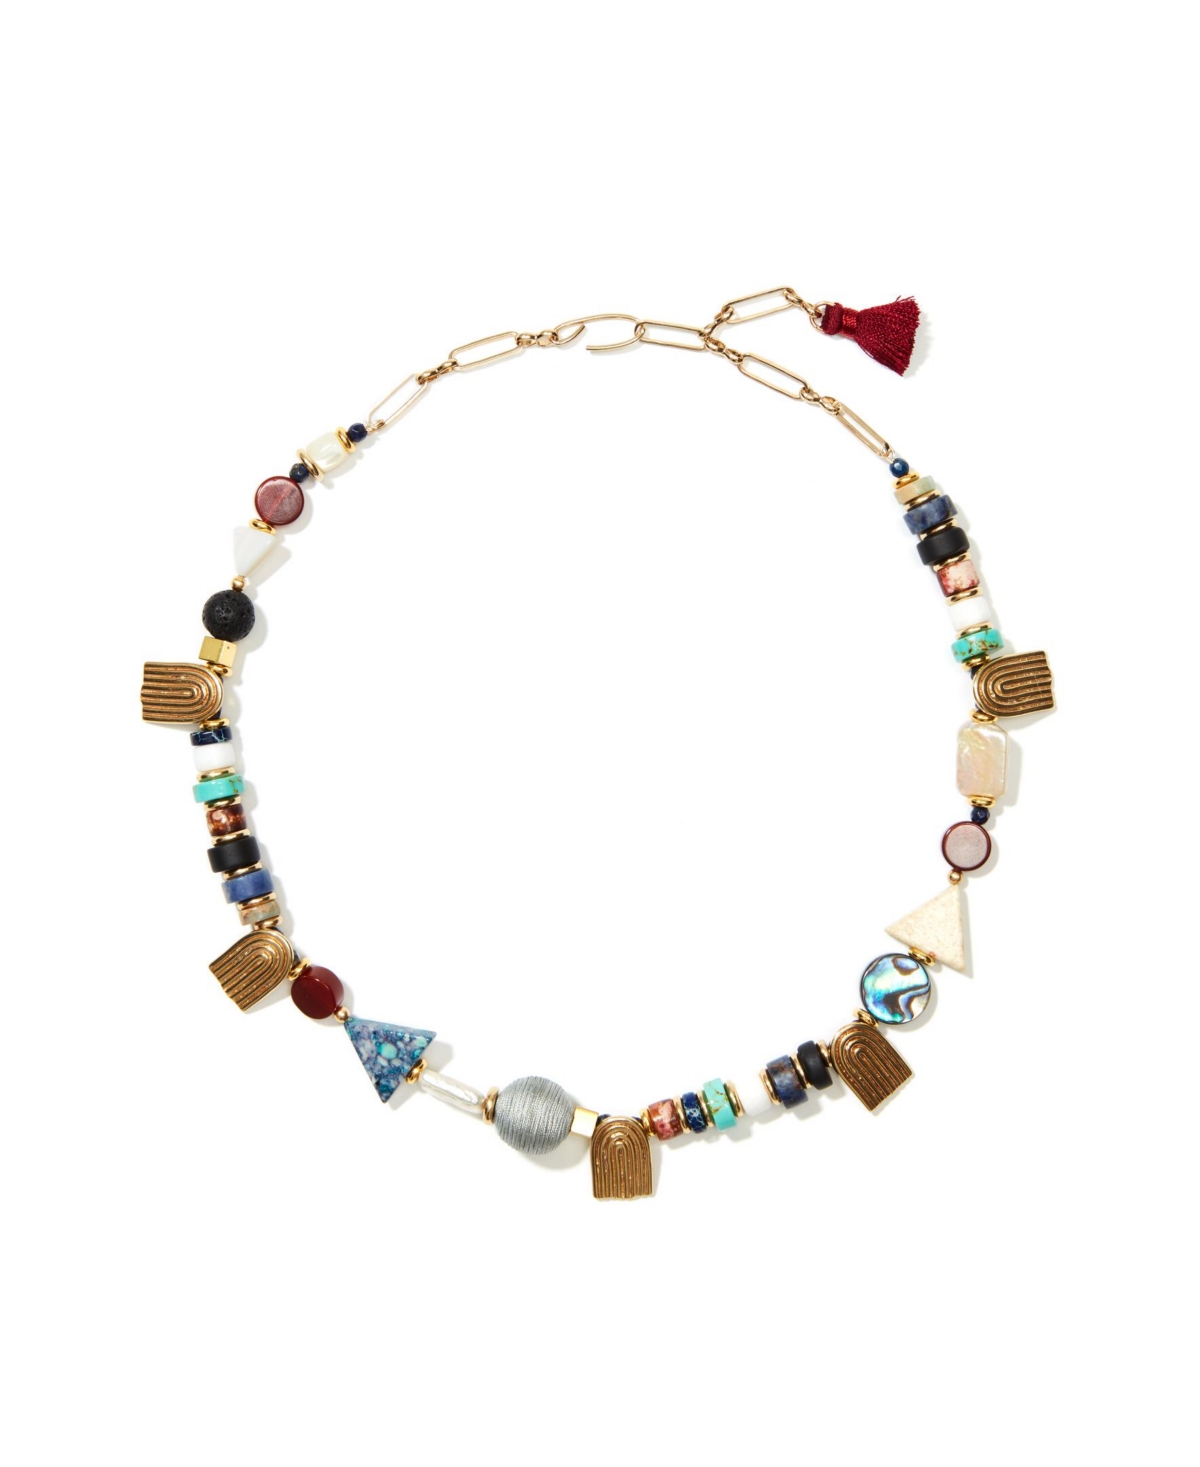 Nectar Nectar New York Gem-rainbow With Ellipses Chain Necklace In Gold Plated